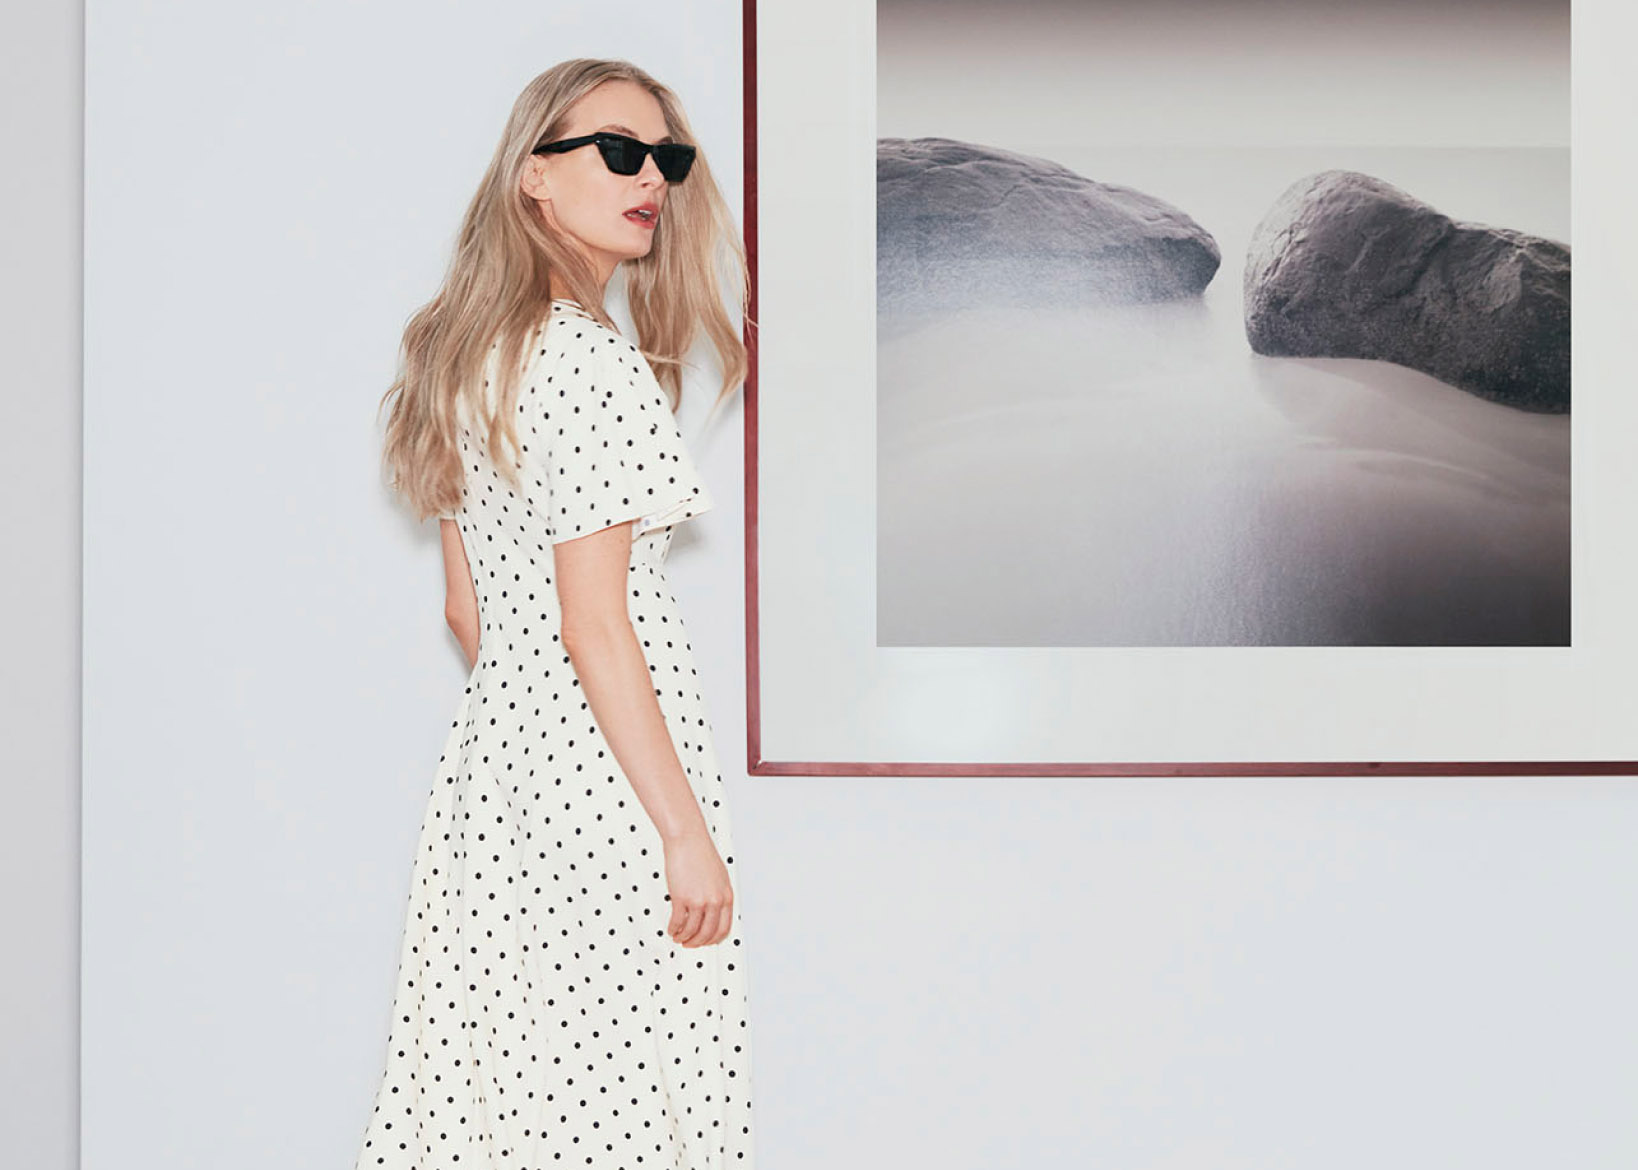 Model photographed standing in front of a photo on a wall wearing a polka dot dress.